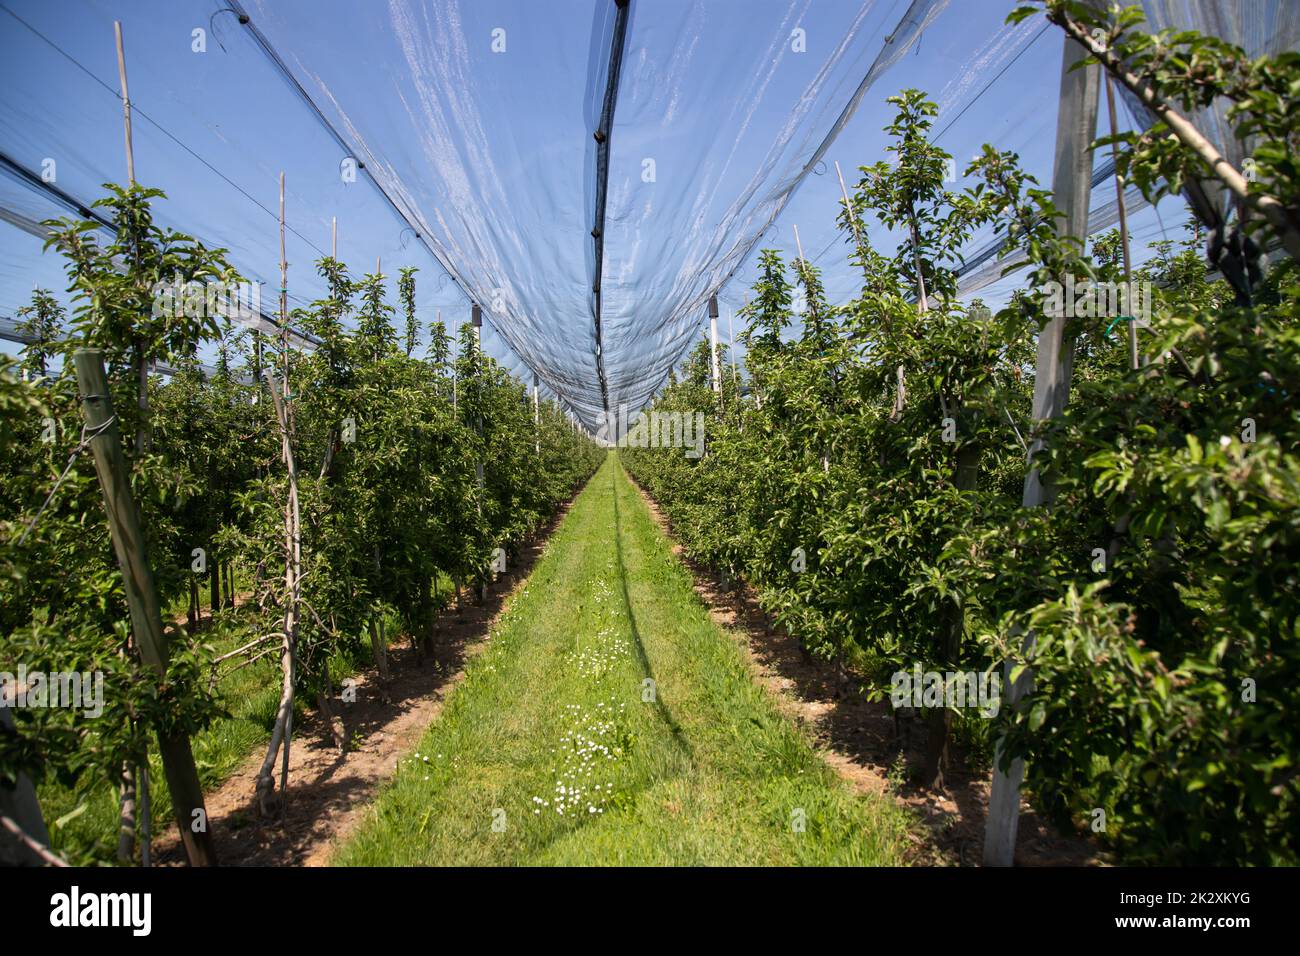 Orchard with anti hail net Stock Photo